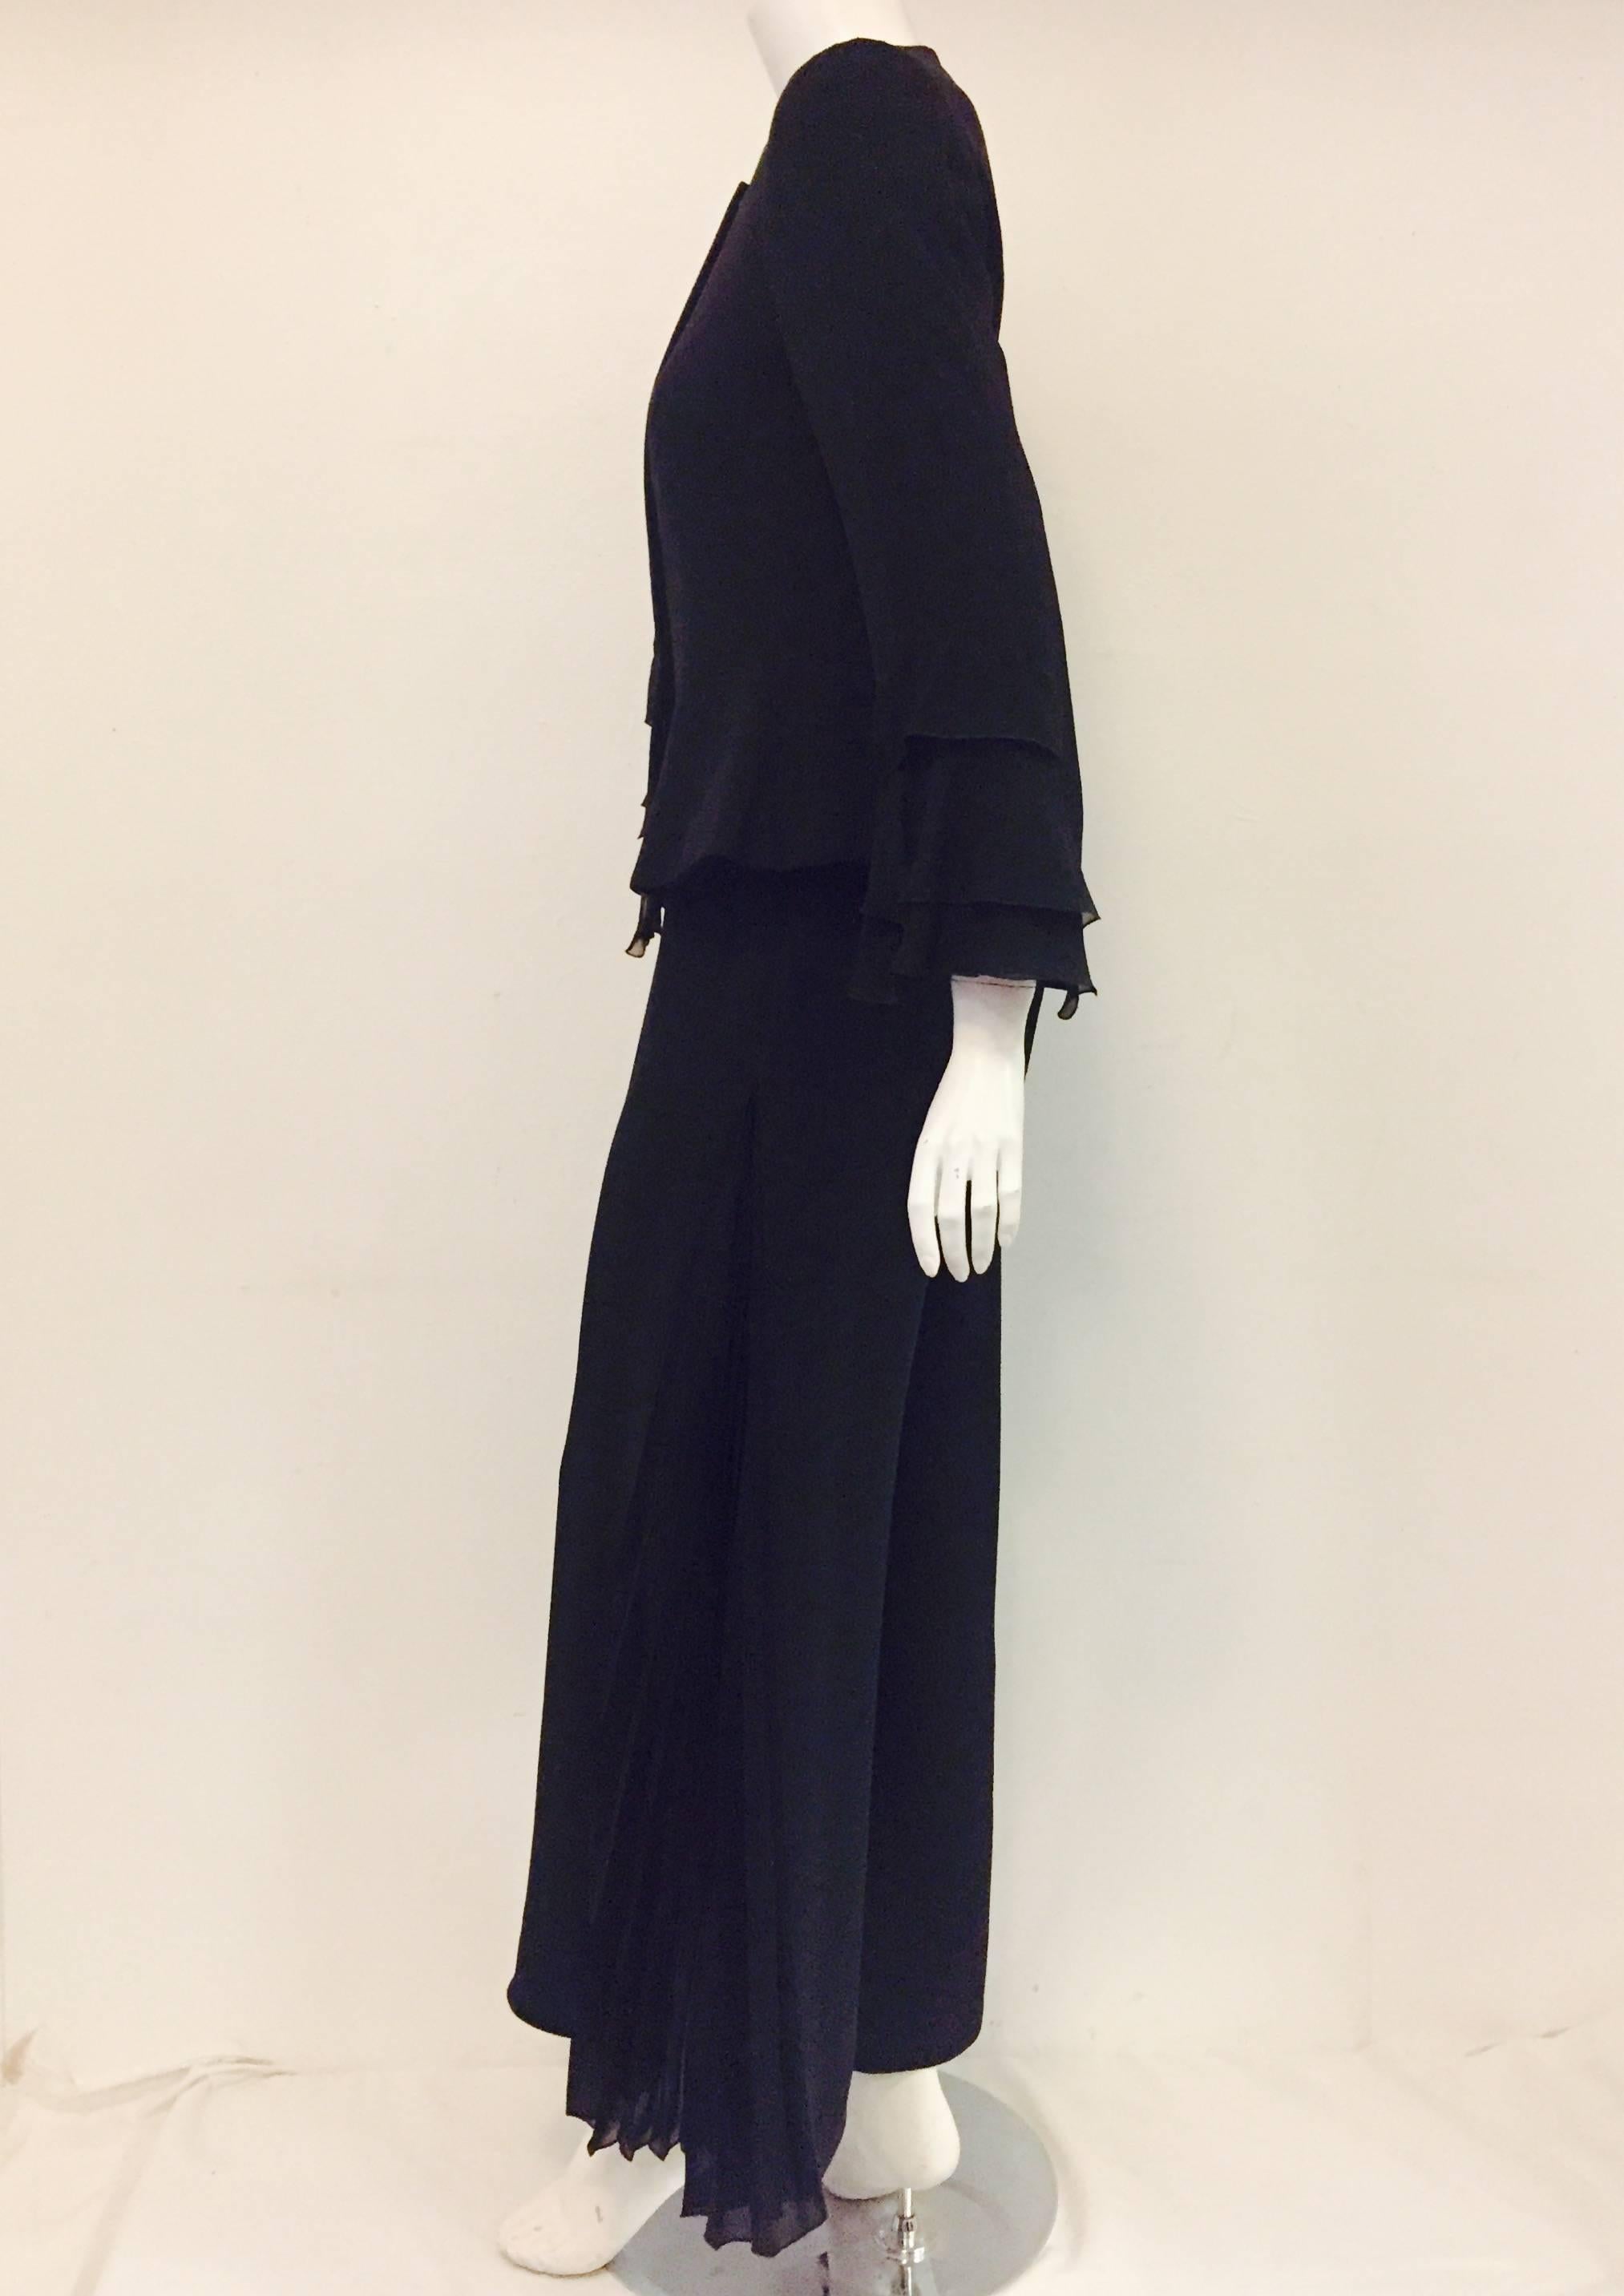 Glorious Giorgio Armani evening silk pantsuit with long sleeve jacket top and stylish palazzo pleated pants.  The jacket top has beautifully decorated sleeves with faux pleats and ruffles at the cuff enhancing its luxury impression.  The front also